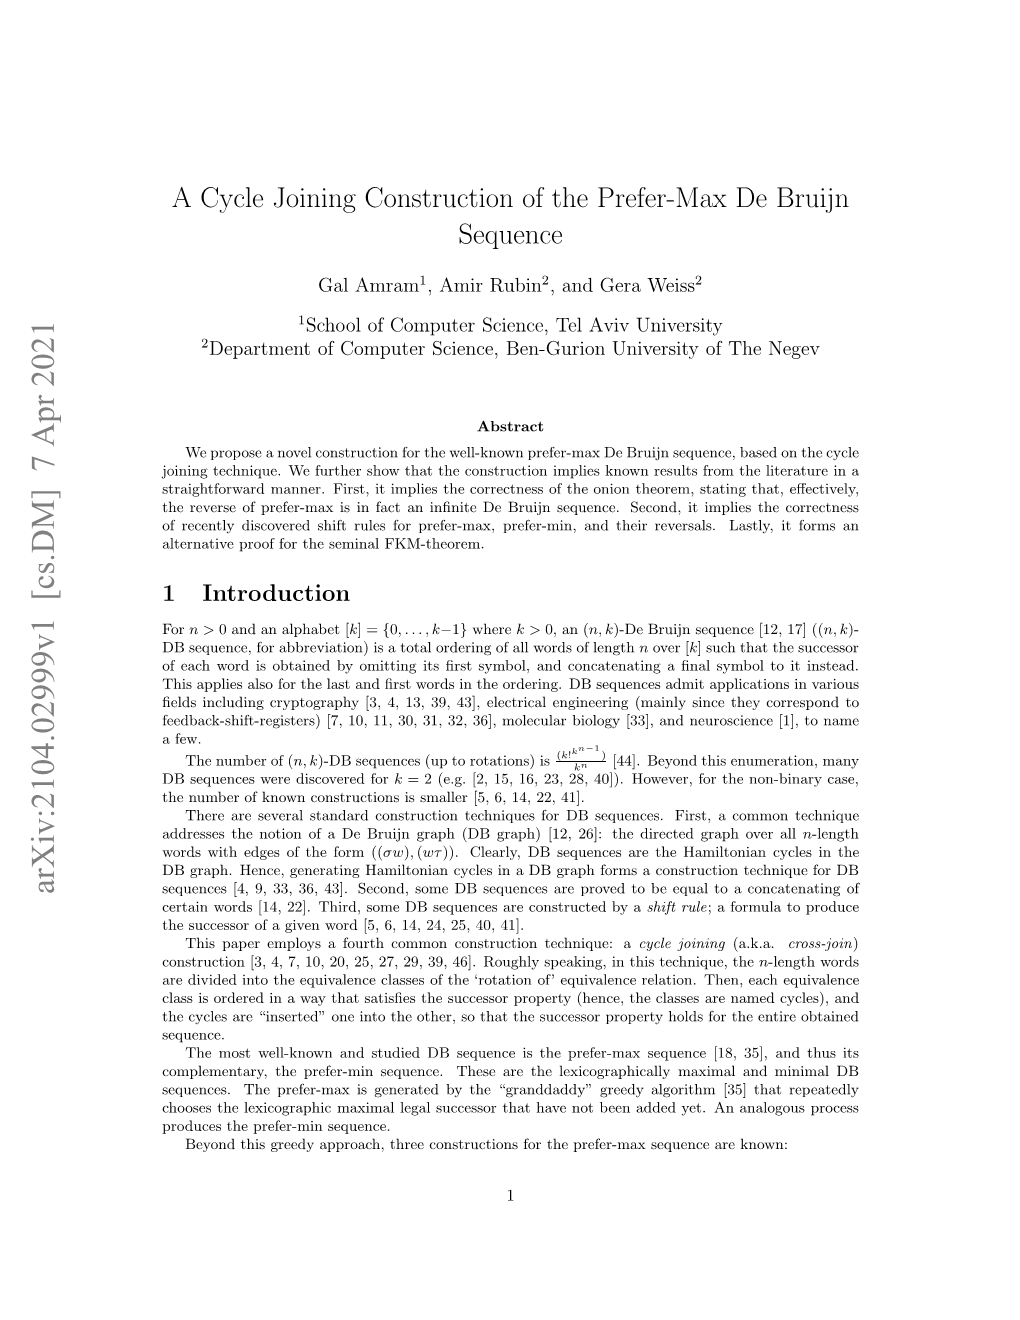 A Cycle Joining Construction of the Prefer-Max De Bruijn Sequence